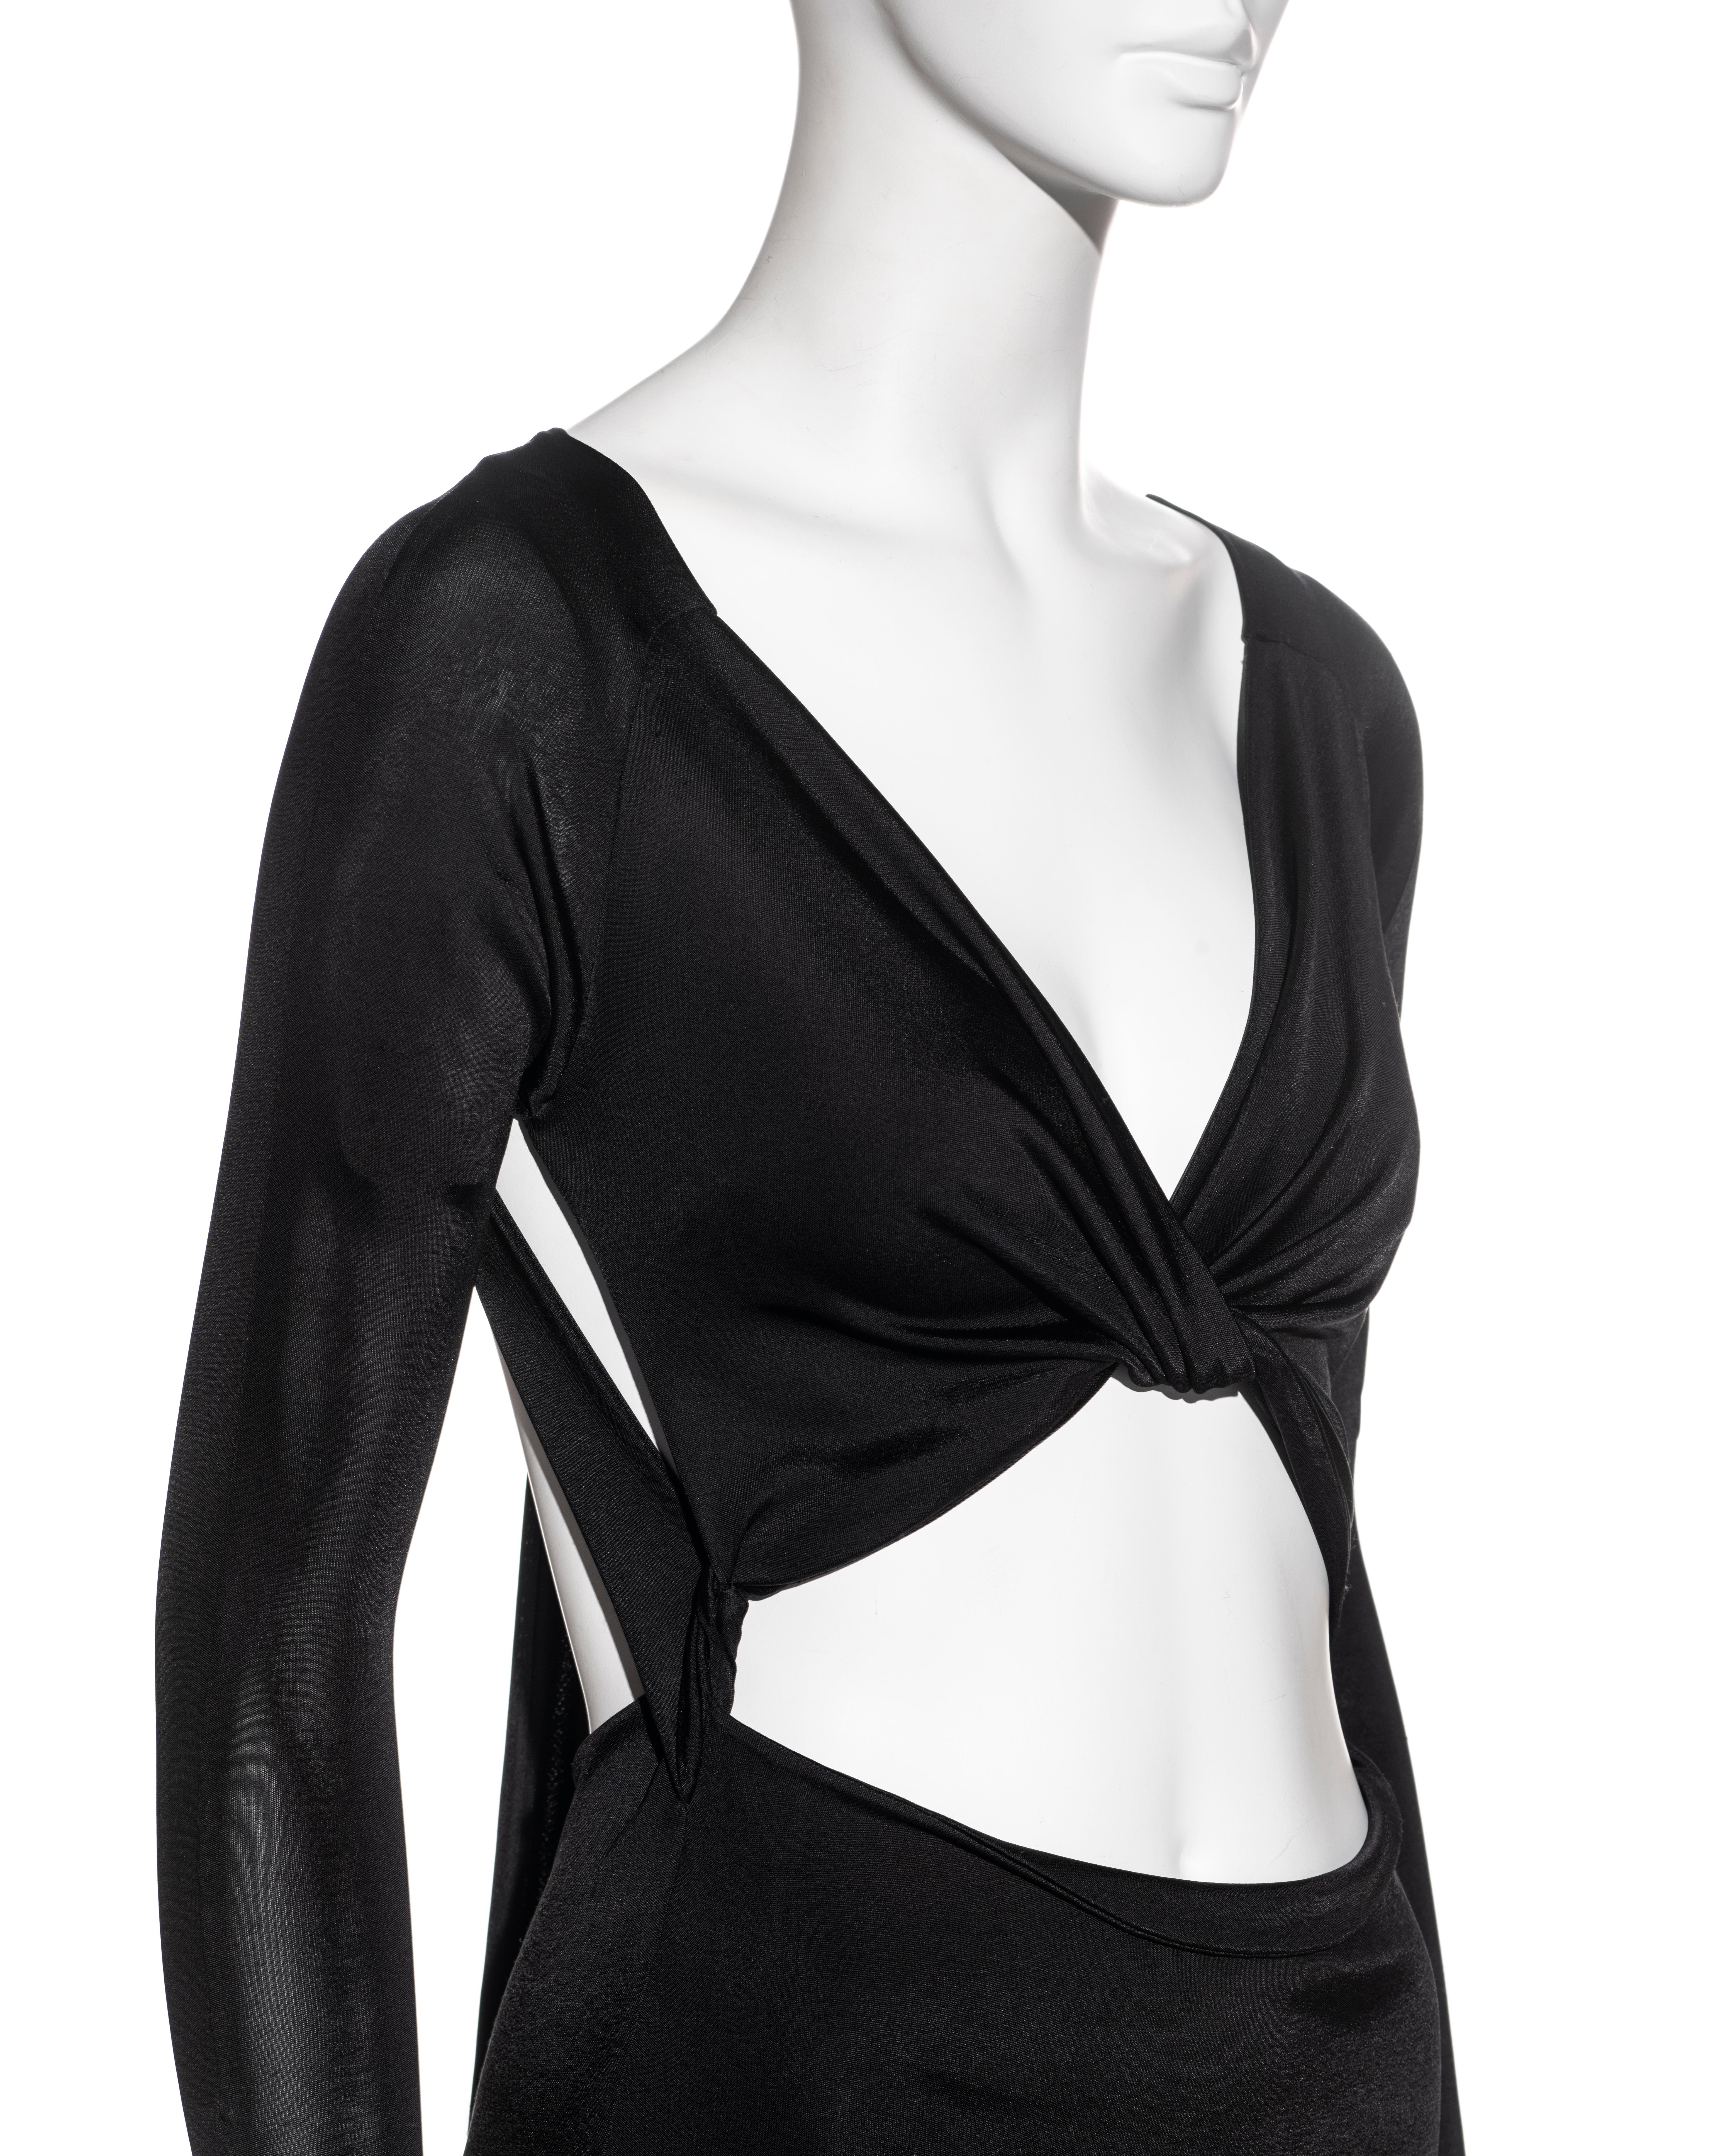 Women's Gucci by Tom Ford black bare midriff long sleeve evening dress, fw 2003